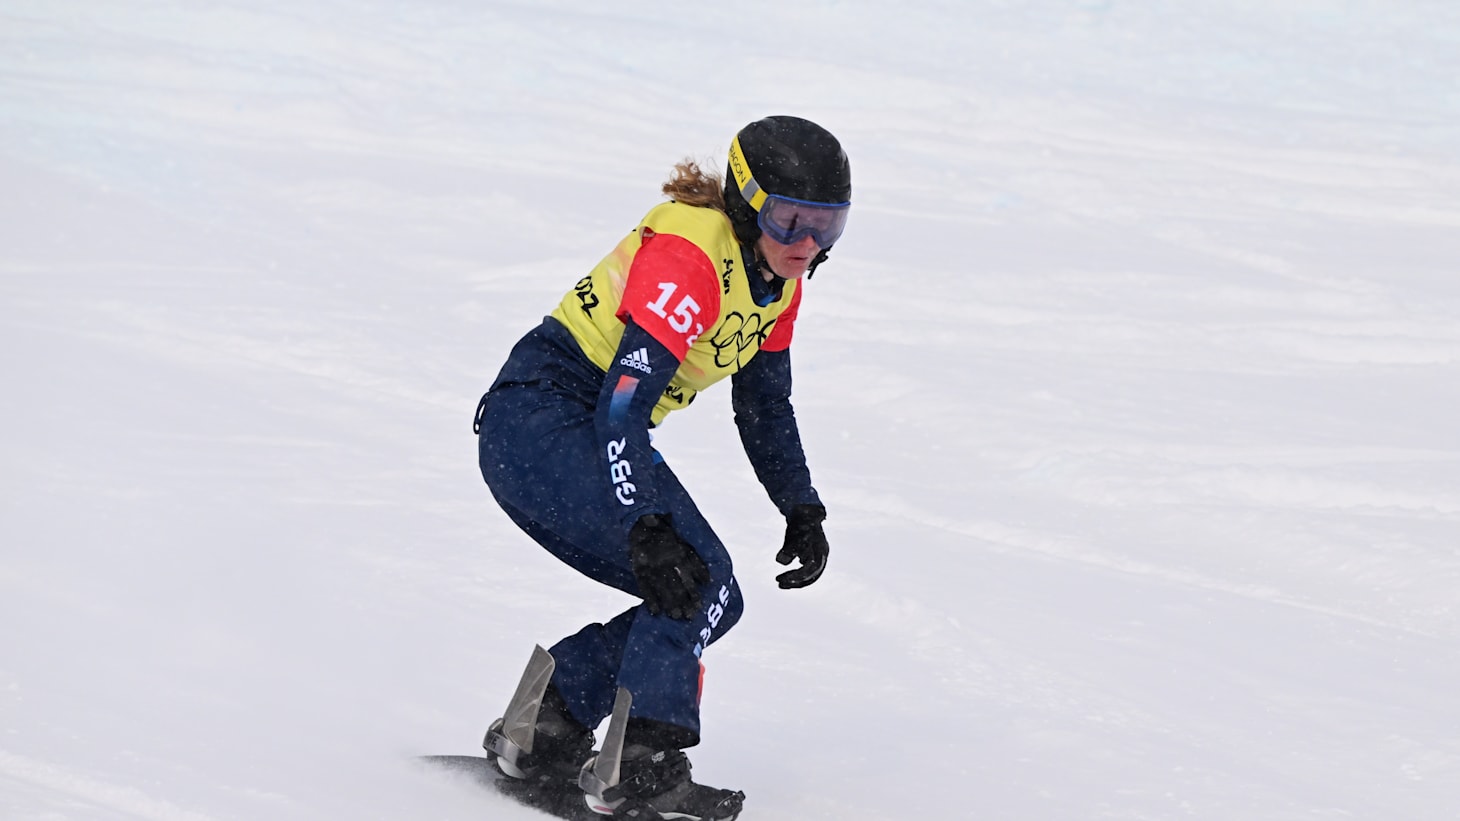 priester pil Slot World Cup snowboard cross: Charlotte Bankes and Martin Noerl clinch titles  in season finale